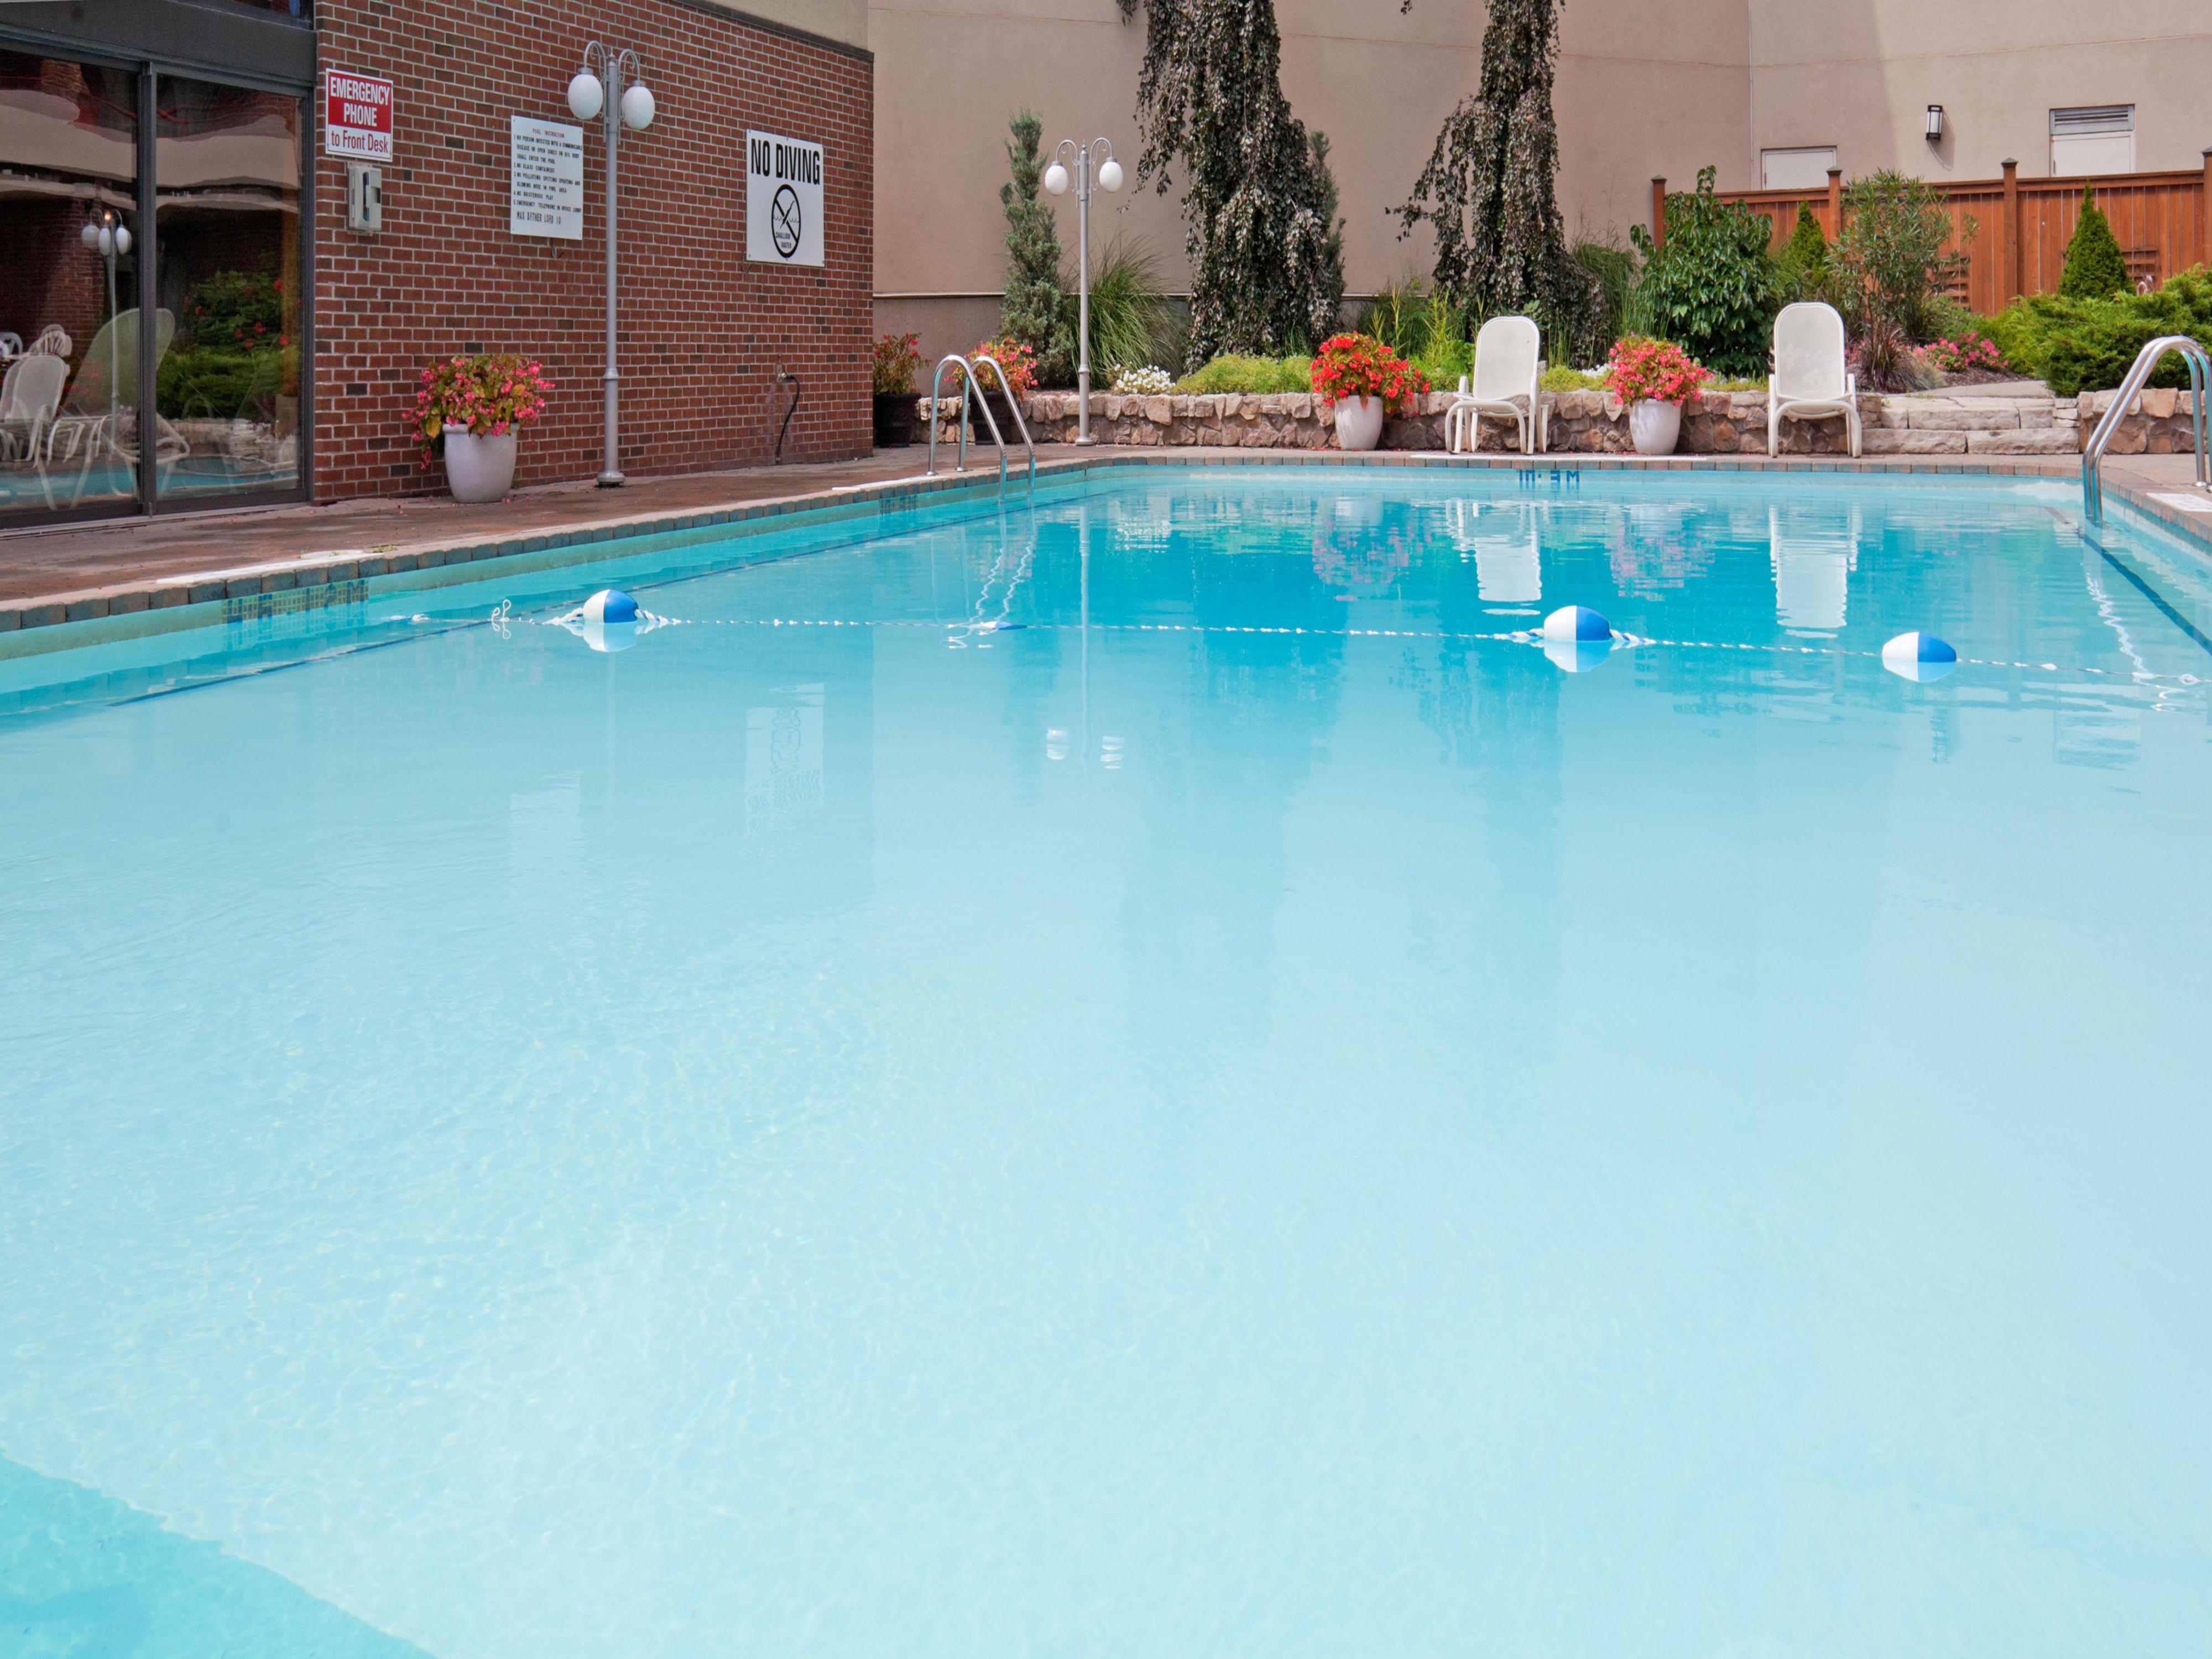 Take a dip in our indoor, heated swimming pool or relax in our heated whirlpool. We've got fun for the whole family and the perfect way to unwind after exploring Niagara Falls. Hit the pool before you enjoy some food and drinks at our onsite indoor and outdoor restaurant Coco's - we've got something delicious for everyone.